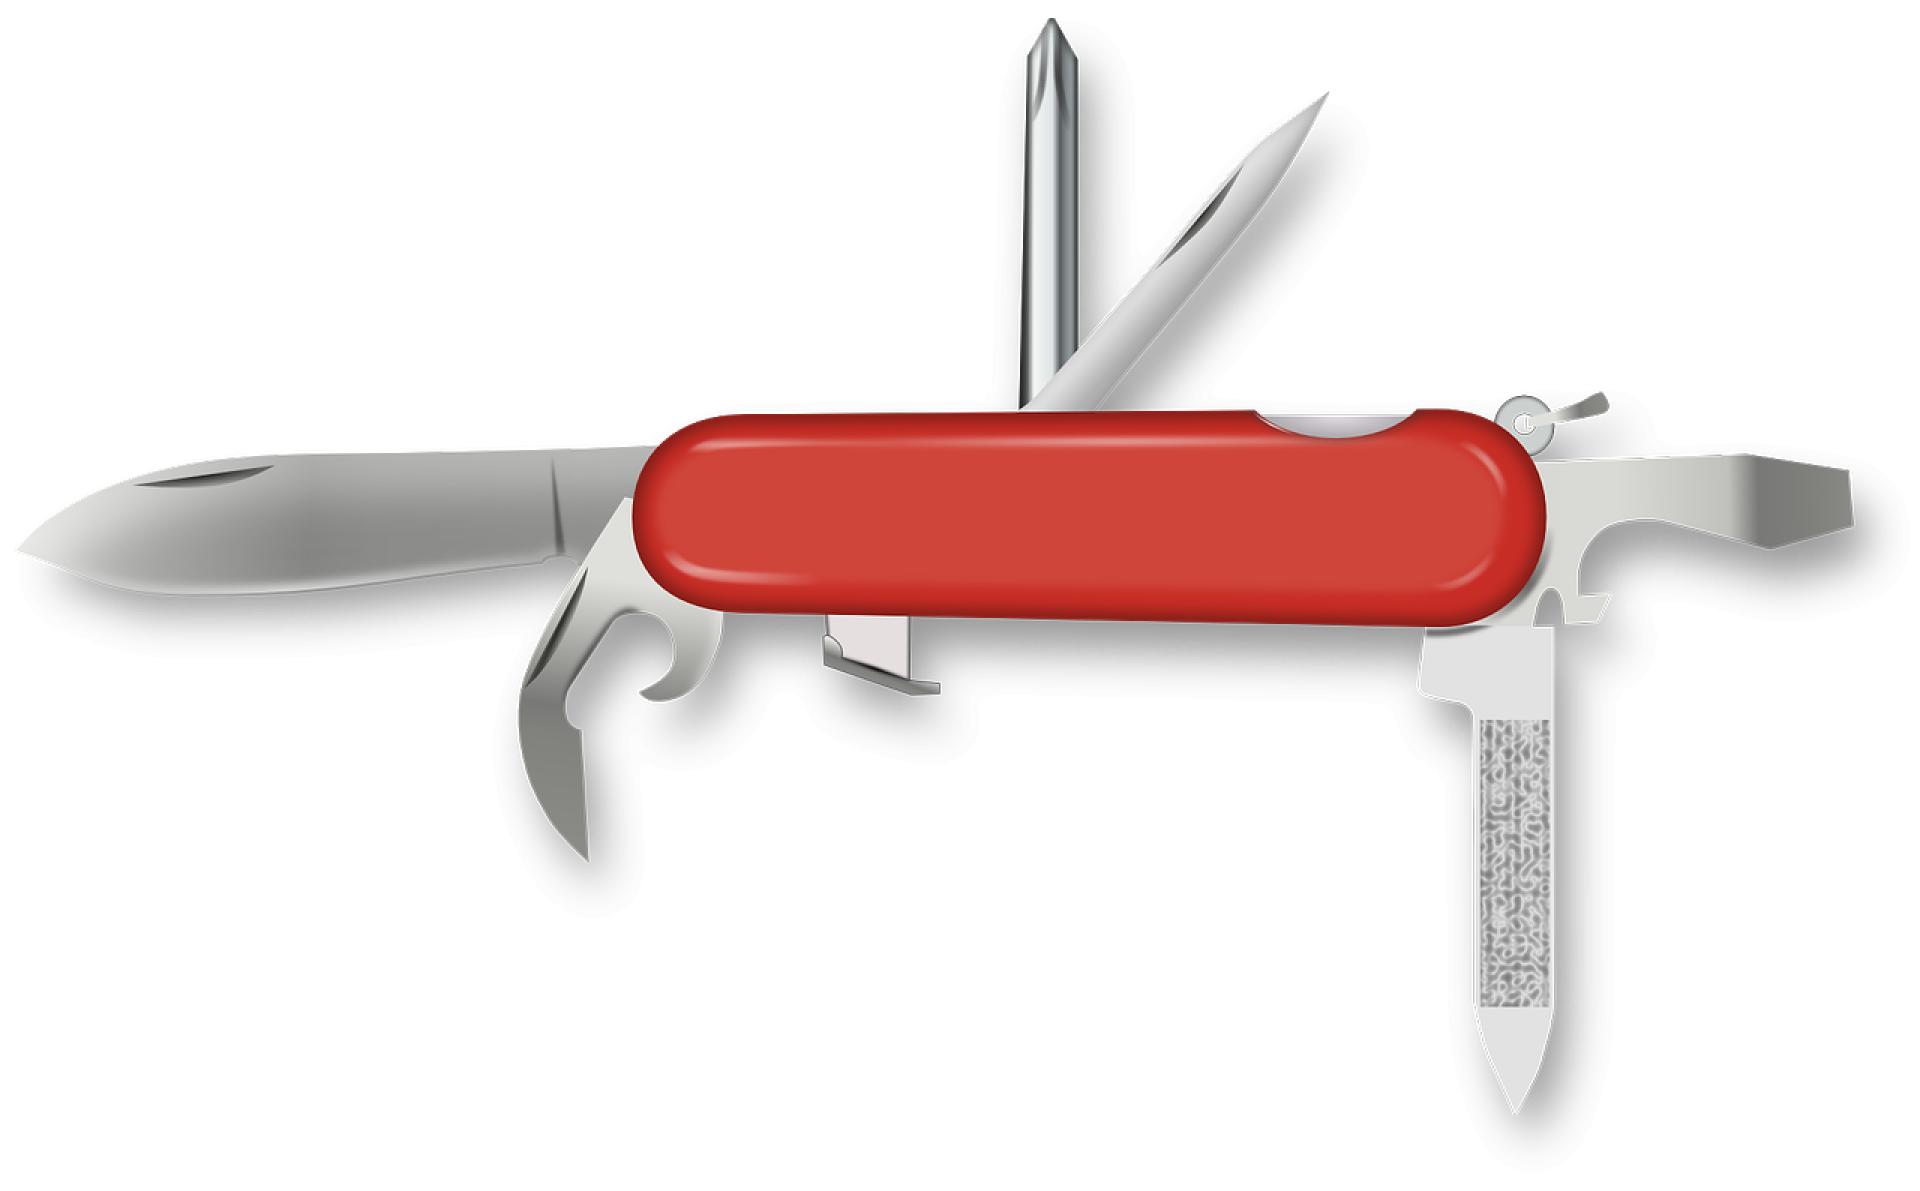 swiss-army-knife-152394_1280.png